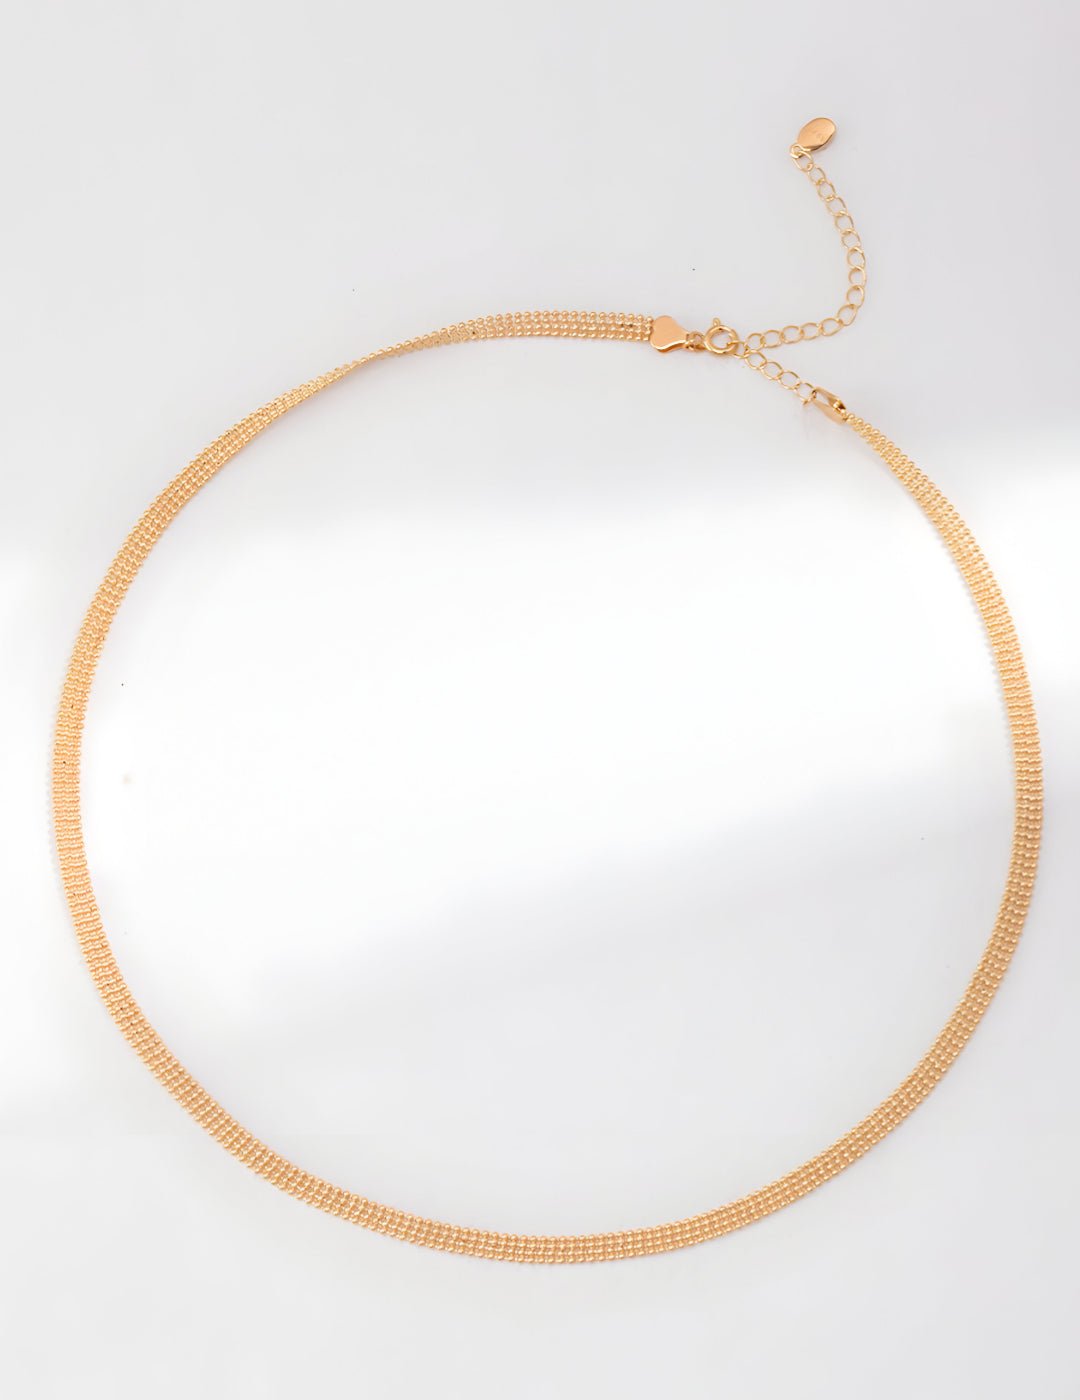 Timeless & Classic elegance adjustable necklace - S925 sterling pure silver - 18K Gold Vermeil